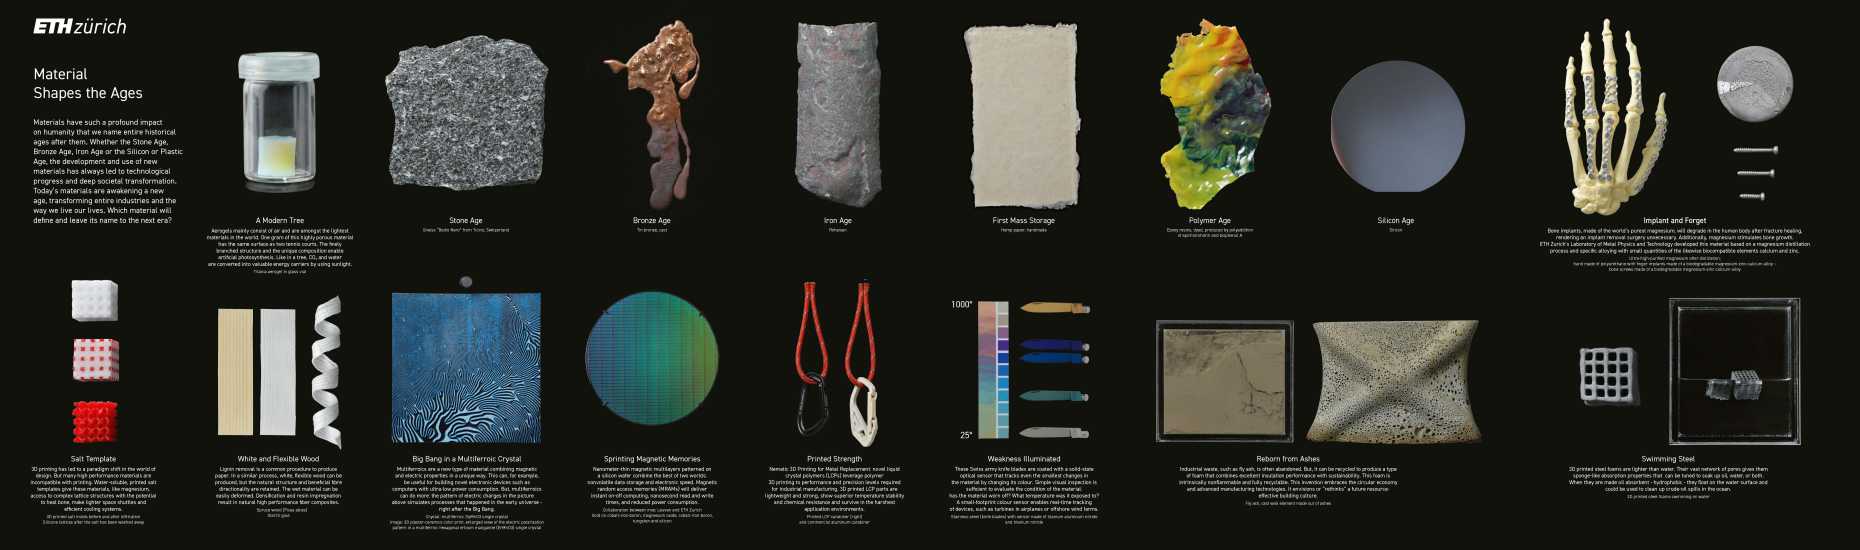 Material Shapes the Ages 